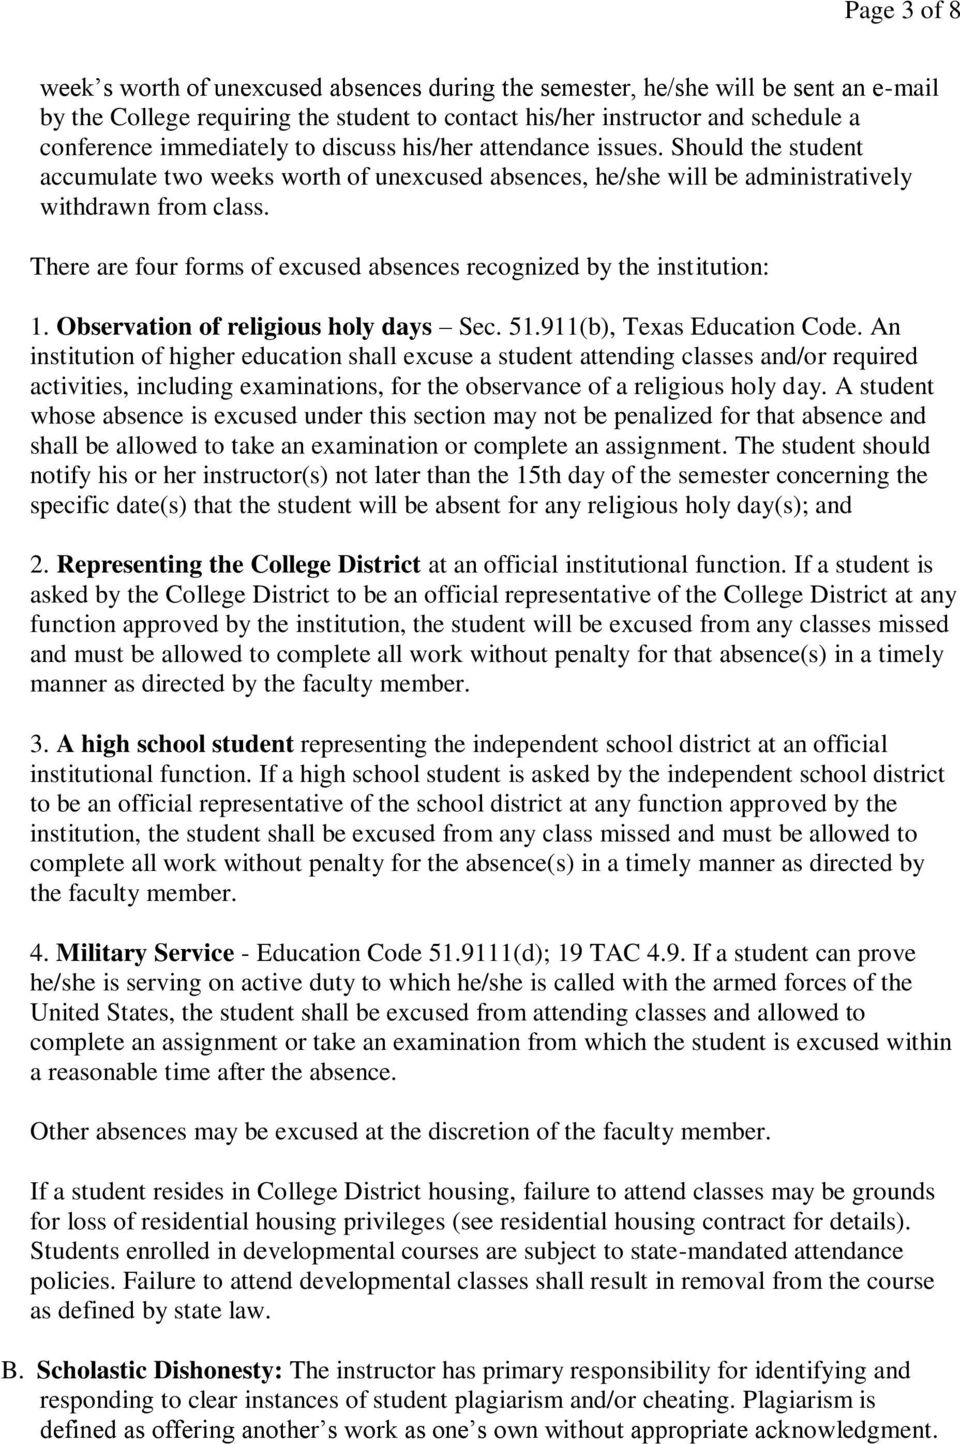 There are four forms of excused absences recognized by the institution: 1. Observation of religious holy days Sec. 51.911(b), Texas Education Code.